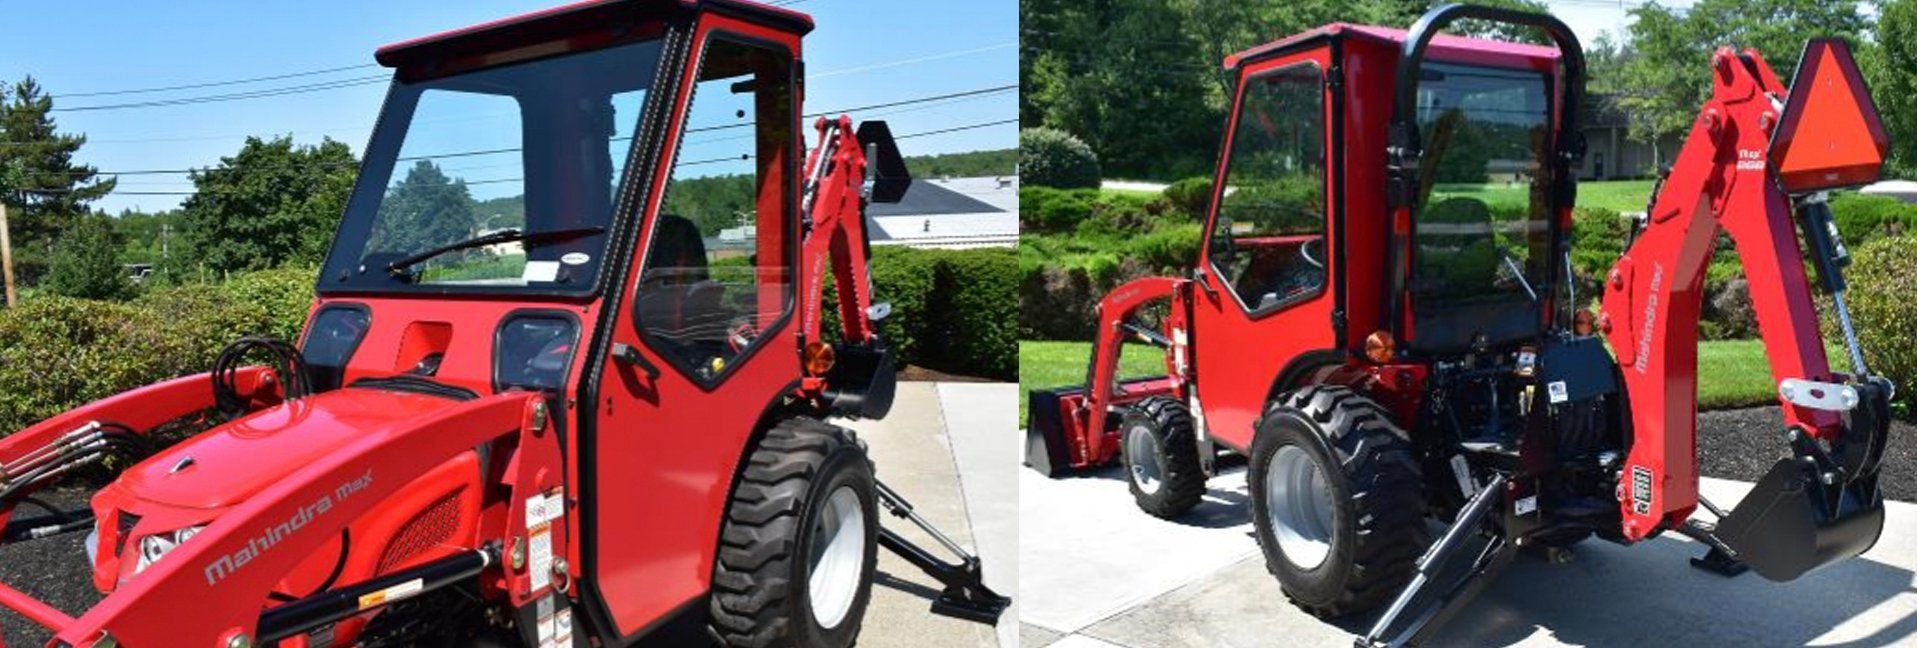 Curtis Industries Introduces All-Steel Cab for the Mahindra Max 26 XLT Compact Tractor